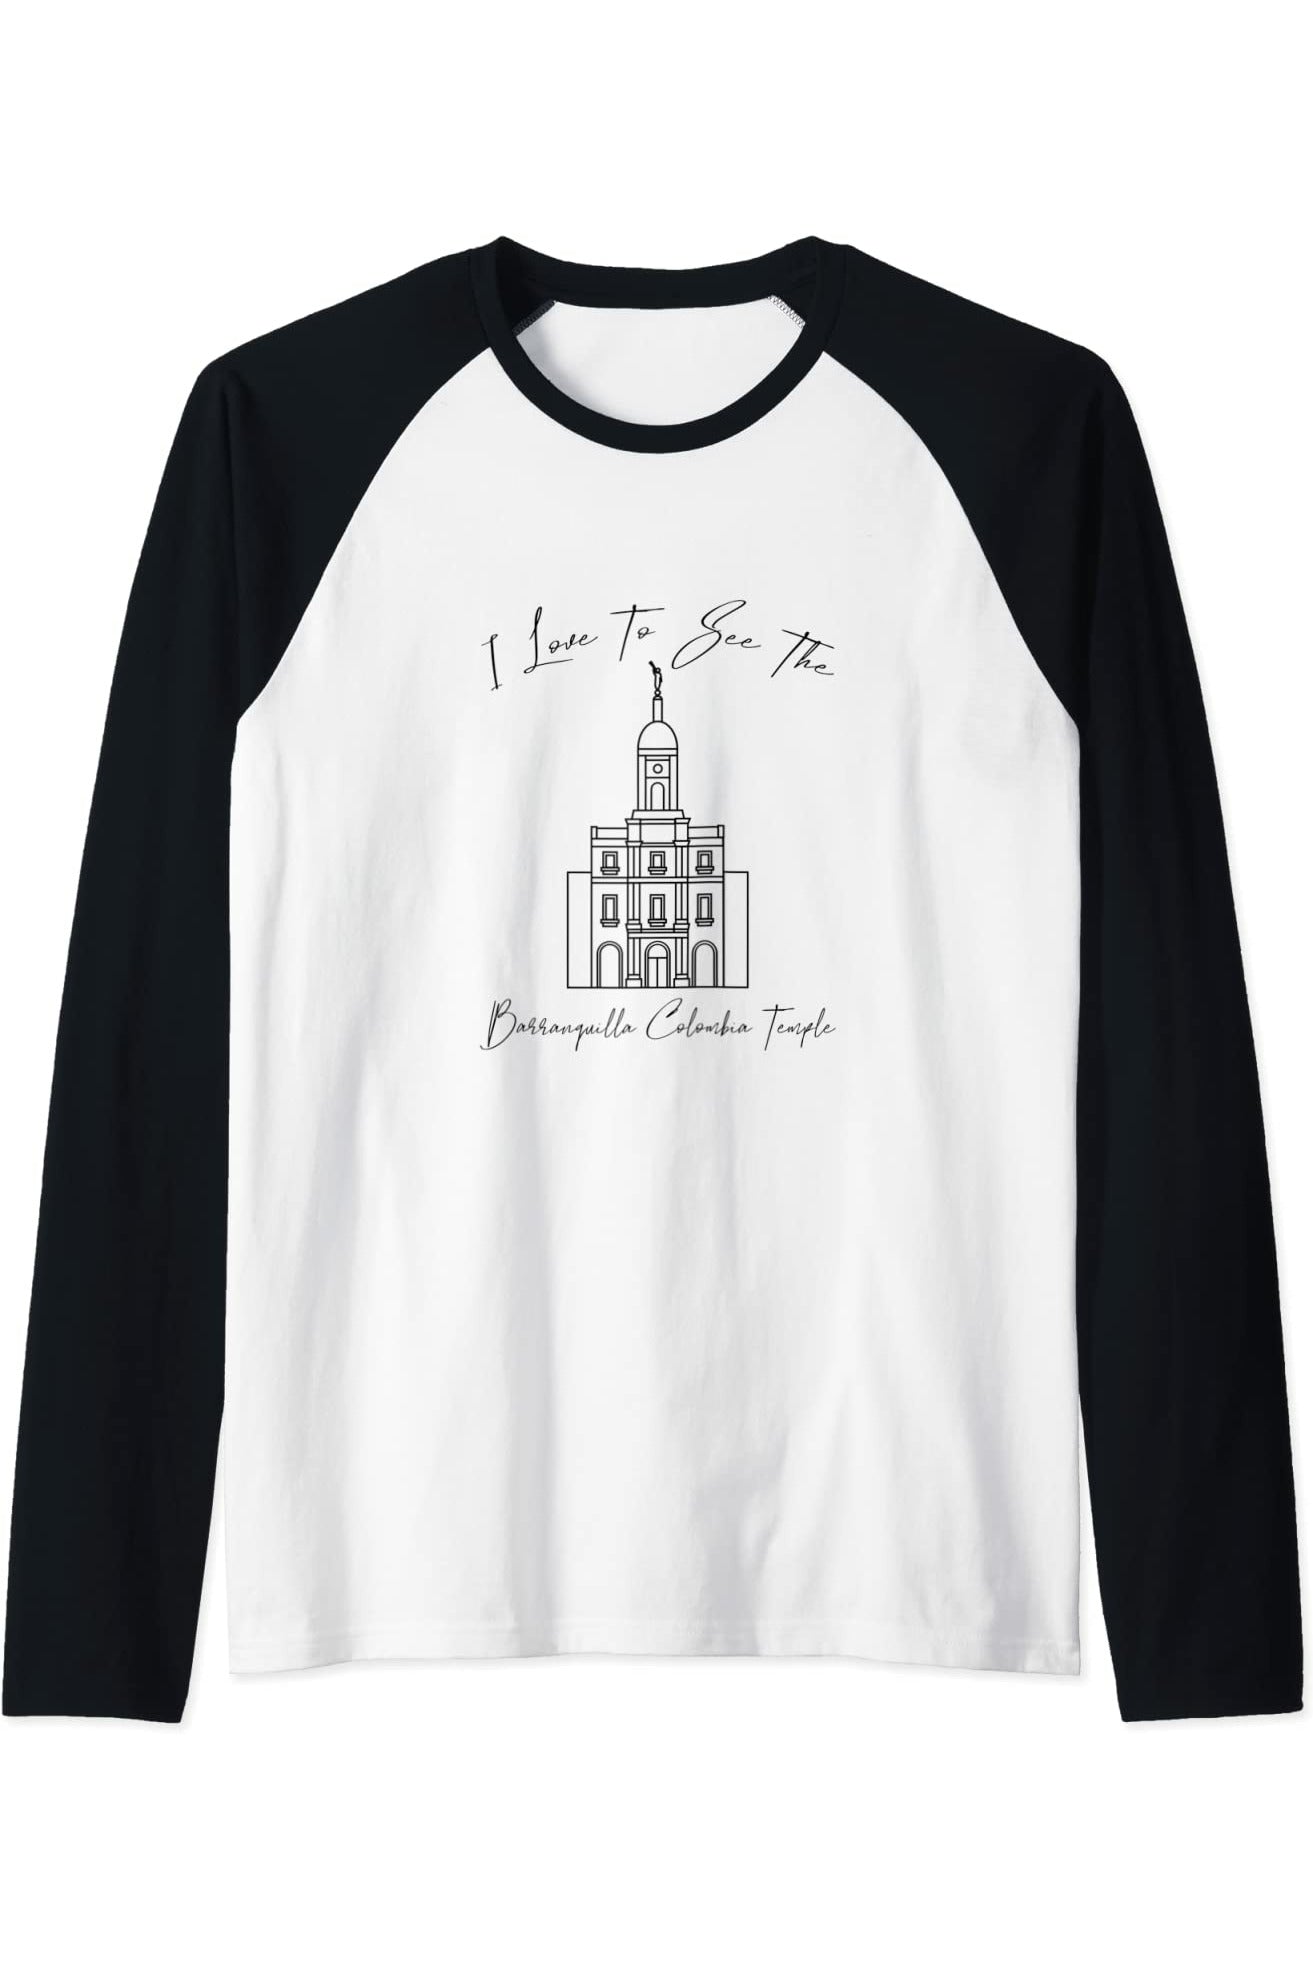 Barranquilla Colombia Temple Raglan - Calligraphy Style (English) US